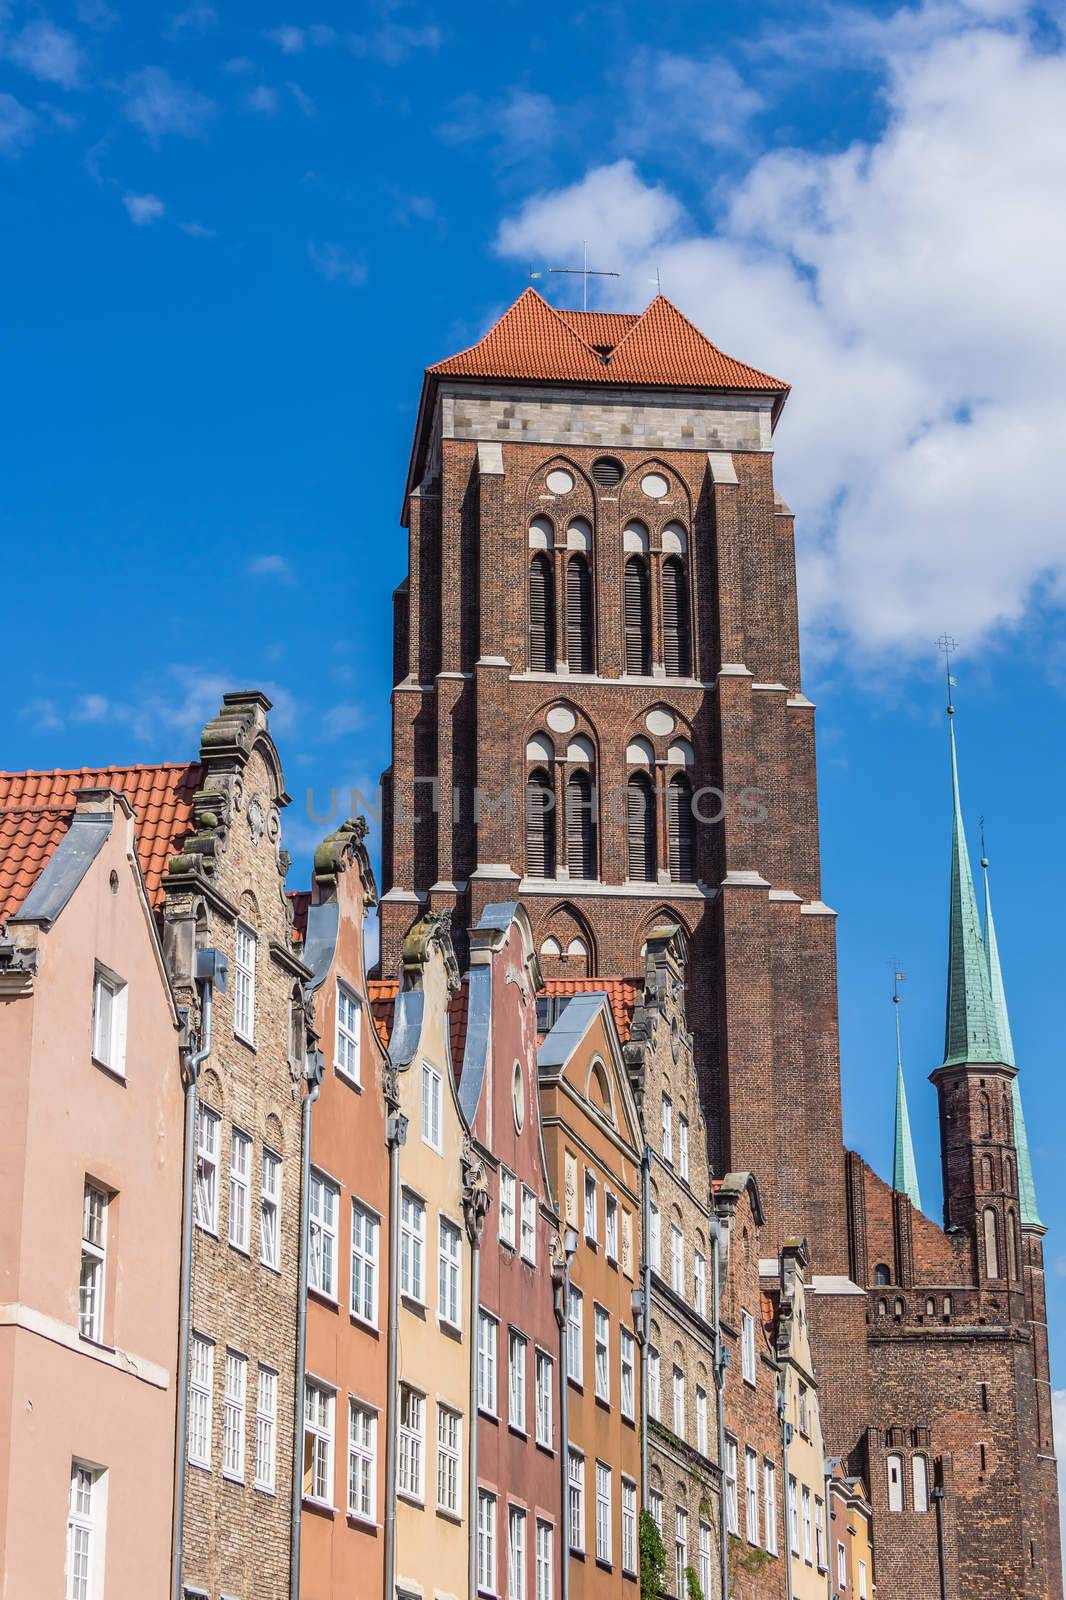 Basilica of the Assumption of the Blessed Virgin Mary in Gdansk, Poland.  Roman Catholic church built in 14th century (construction started in 1343) is the largest brick church in the world.